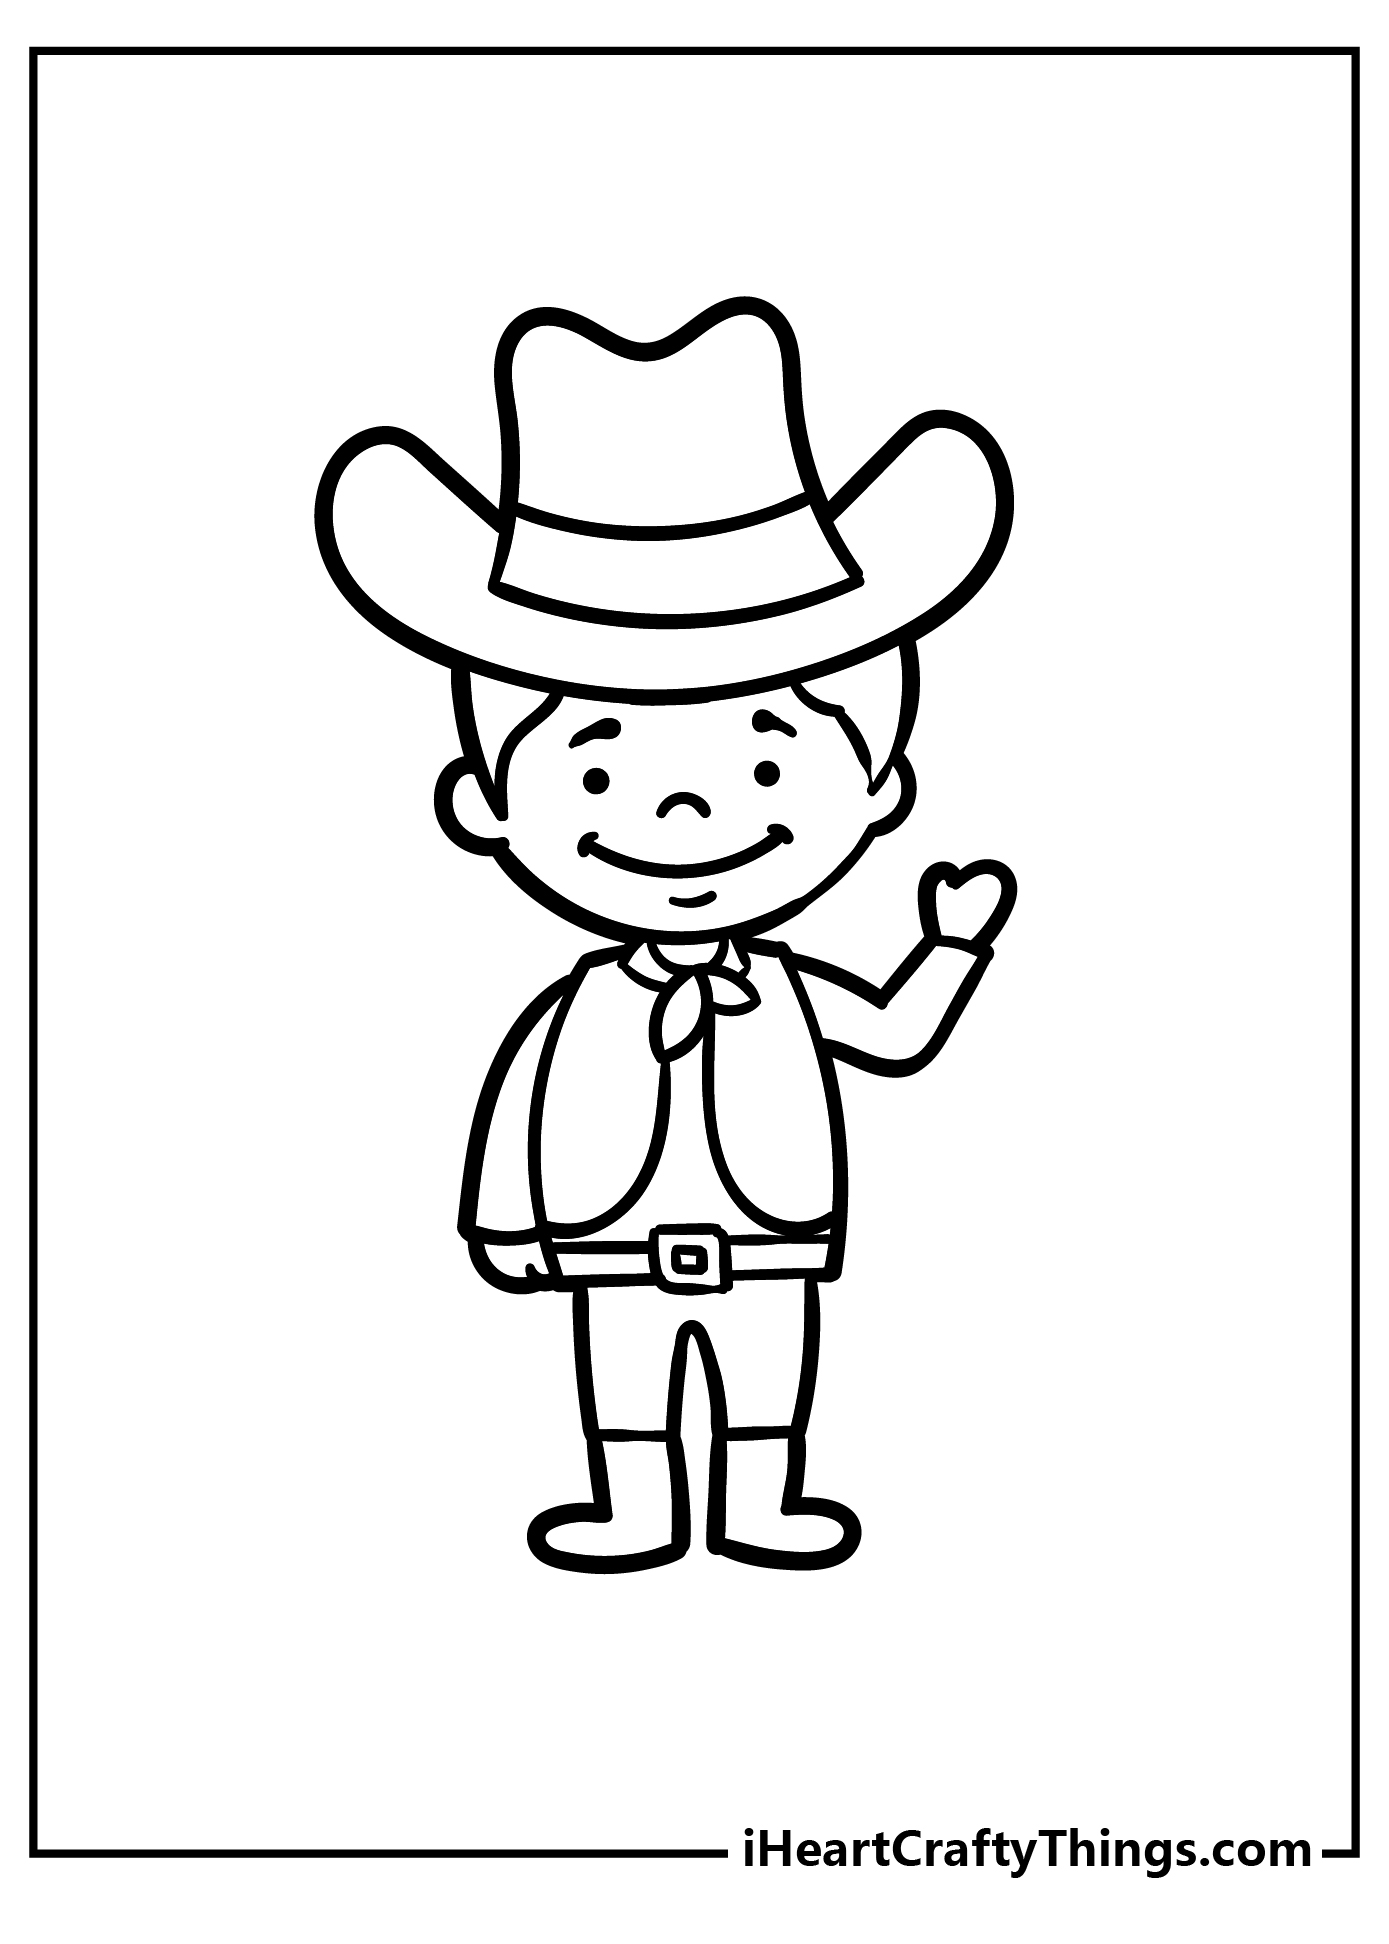 Cowboy Coloring Pages for preschoolers free printable